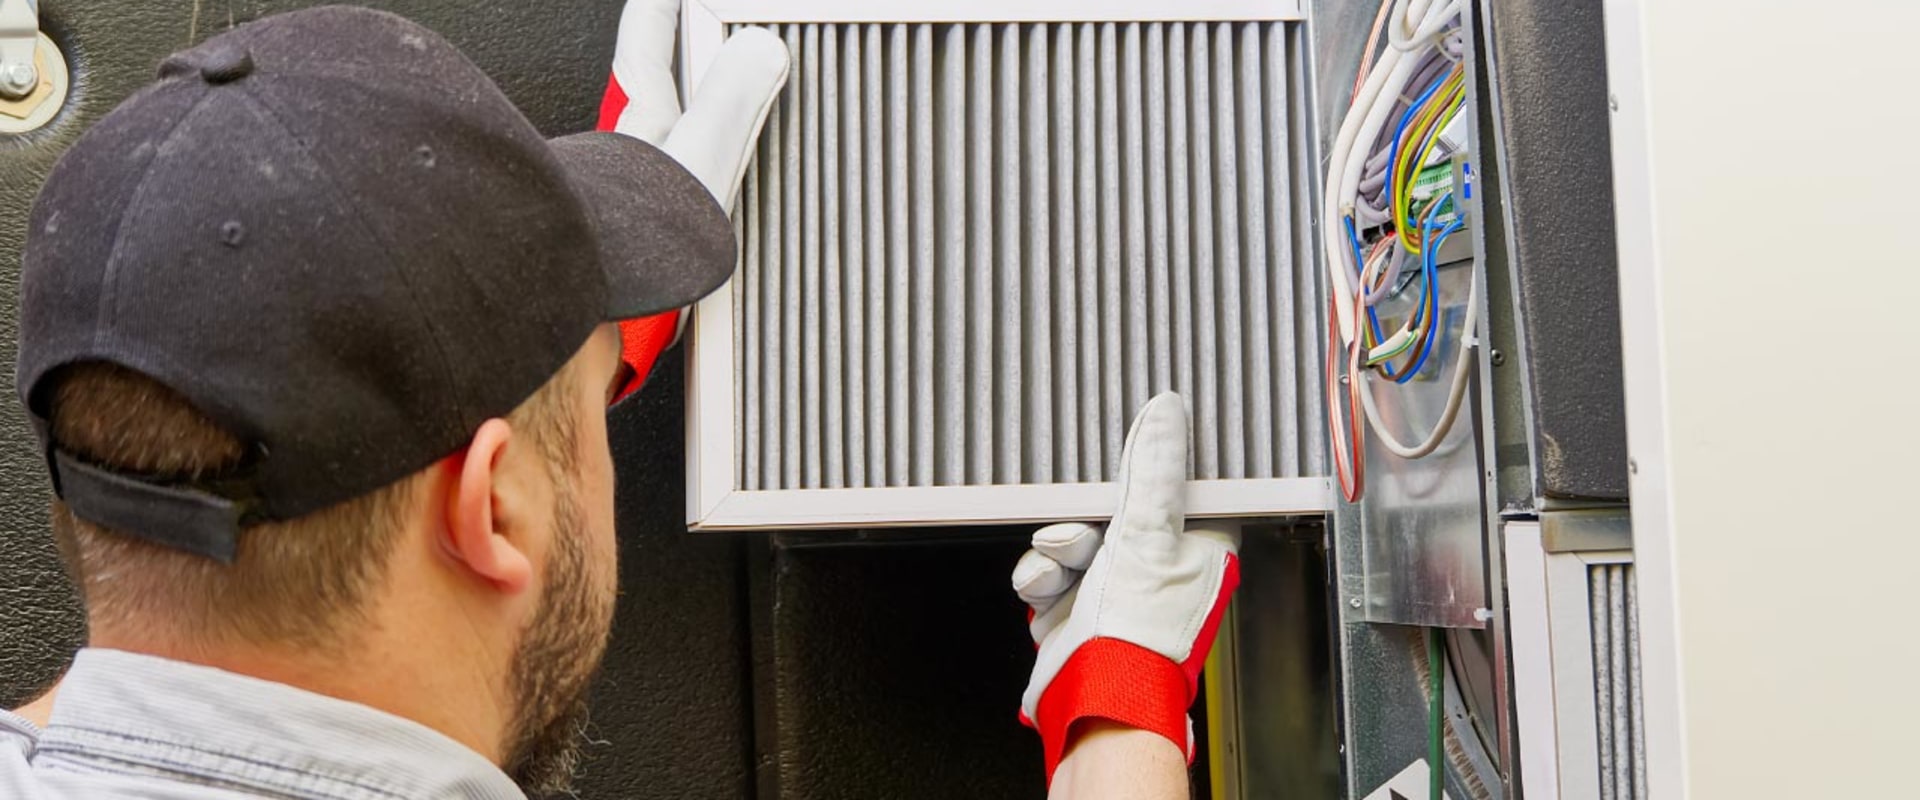 Do I Need a Permit for HVAC Repairs in West Palm Beach, FL?